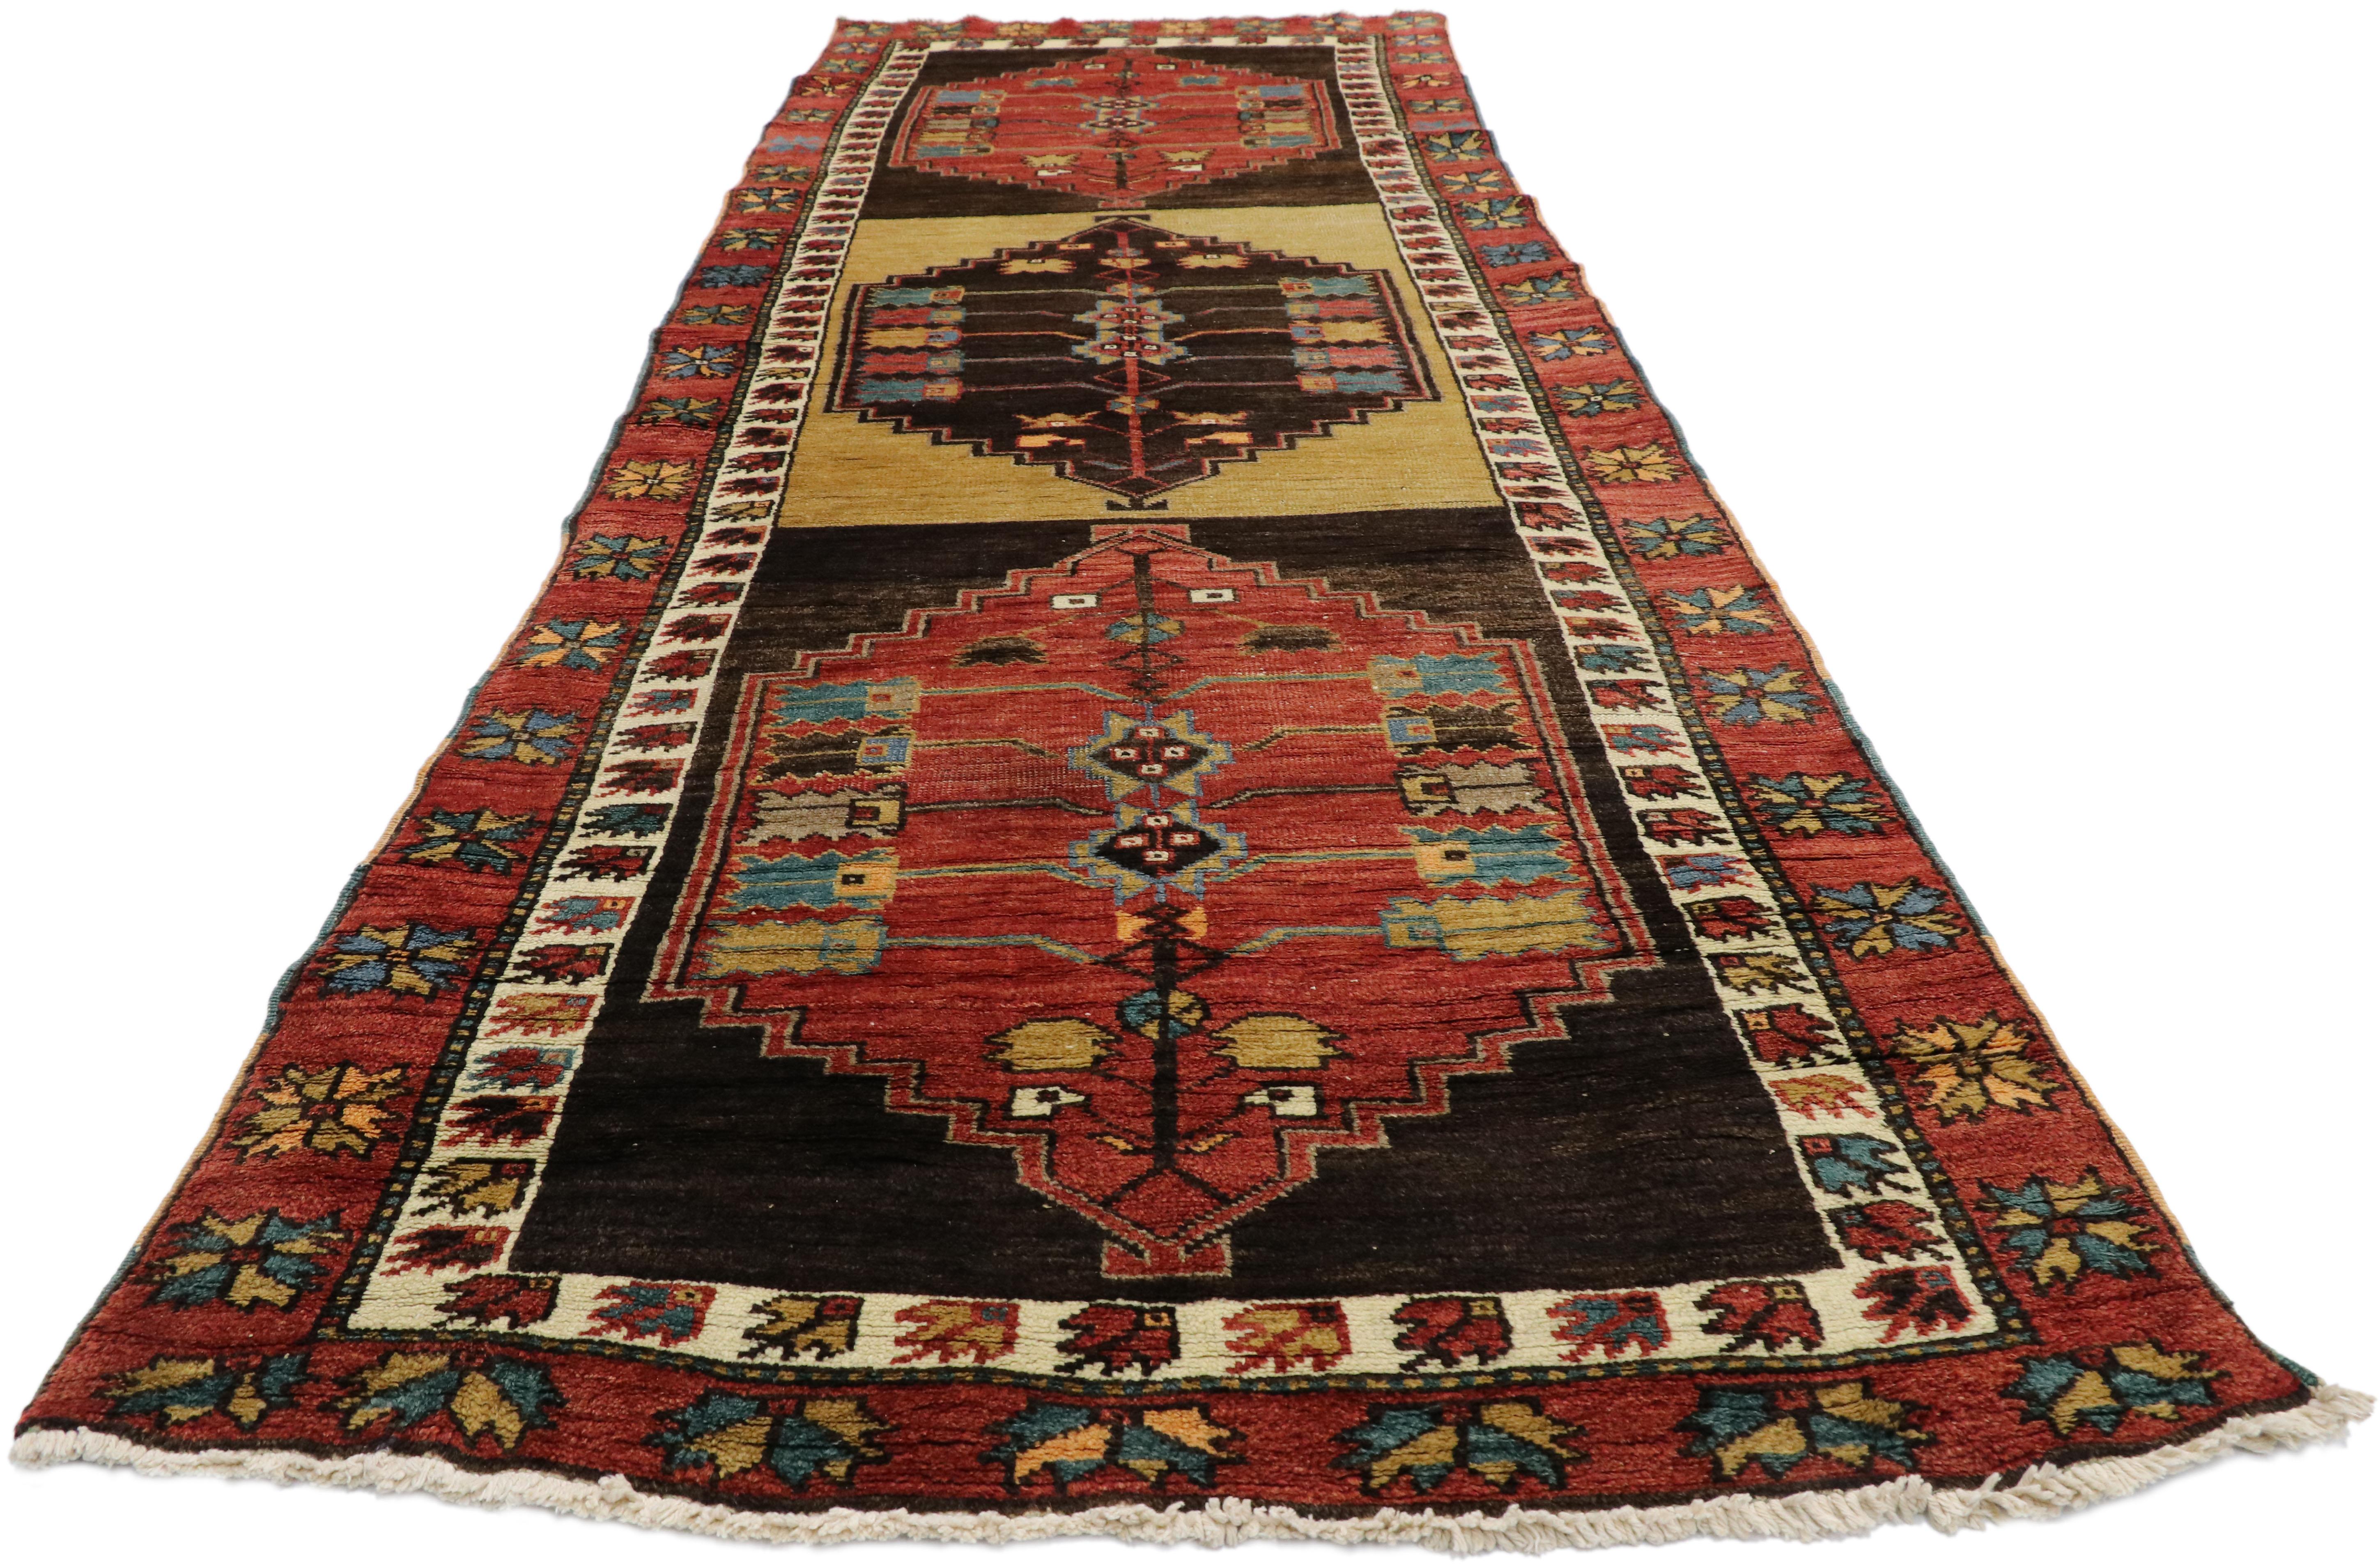 Vintage Turkish Oushak Runner with Mid-Century Modern Tribal Style In Good Condition For Sale In Dallas, TX